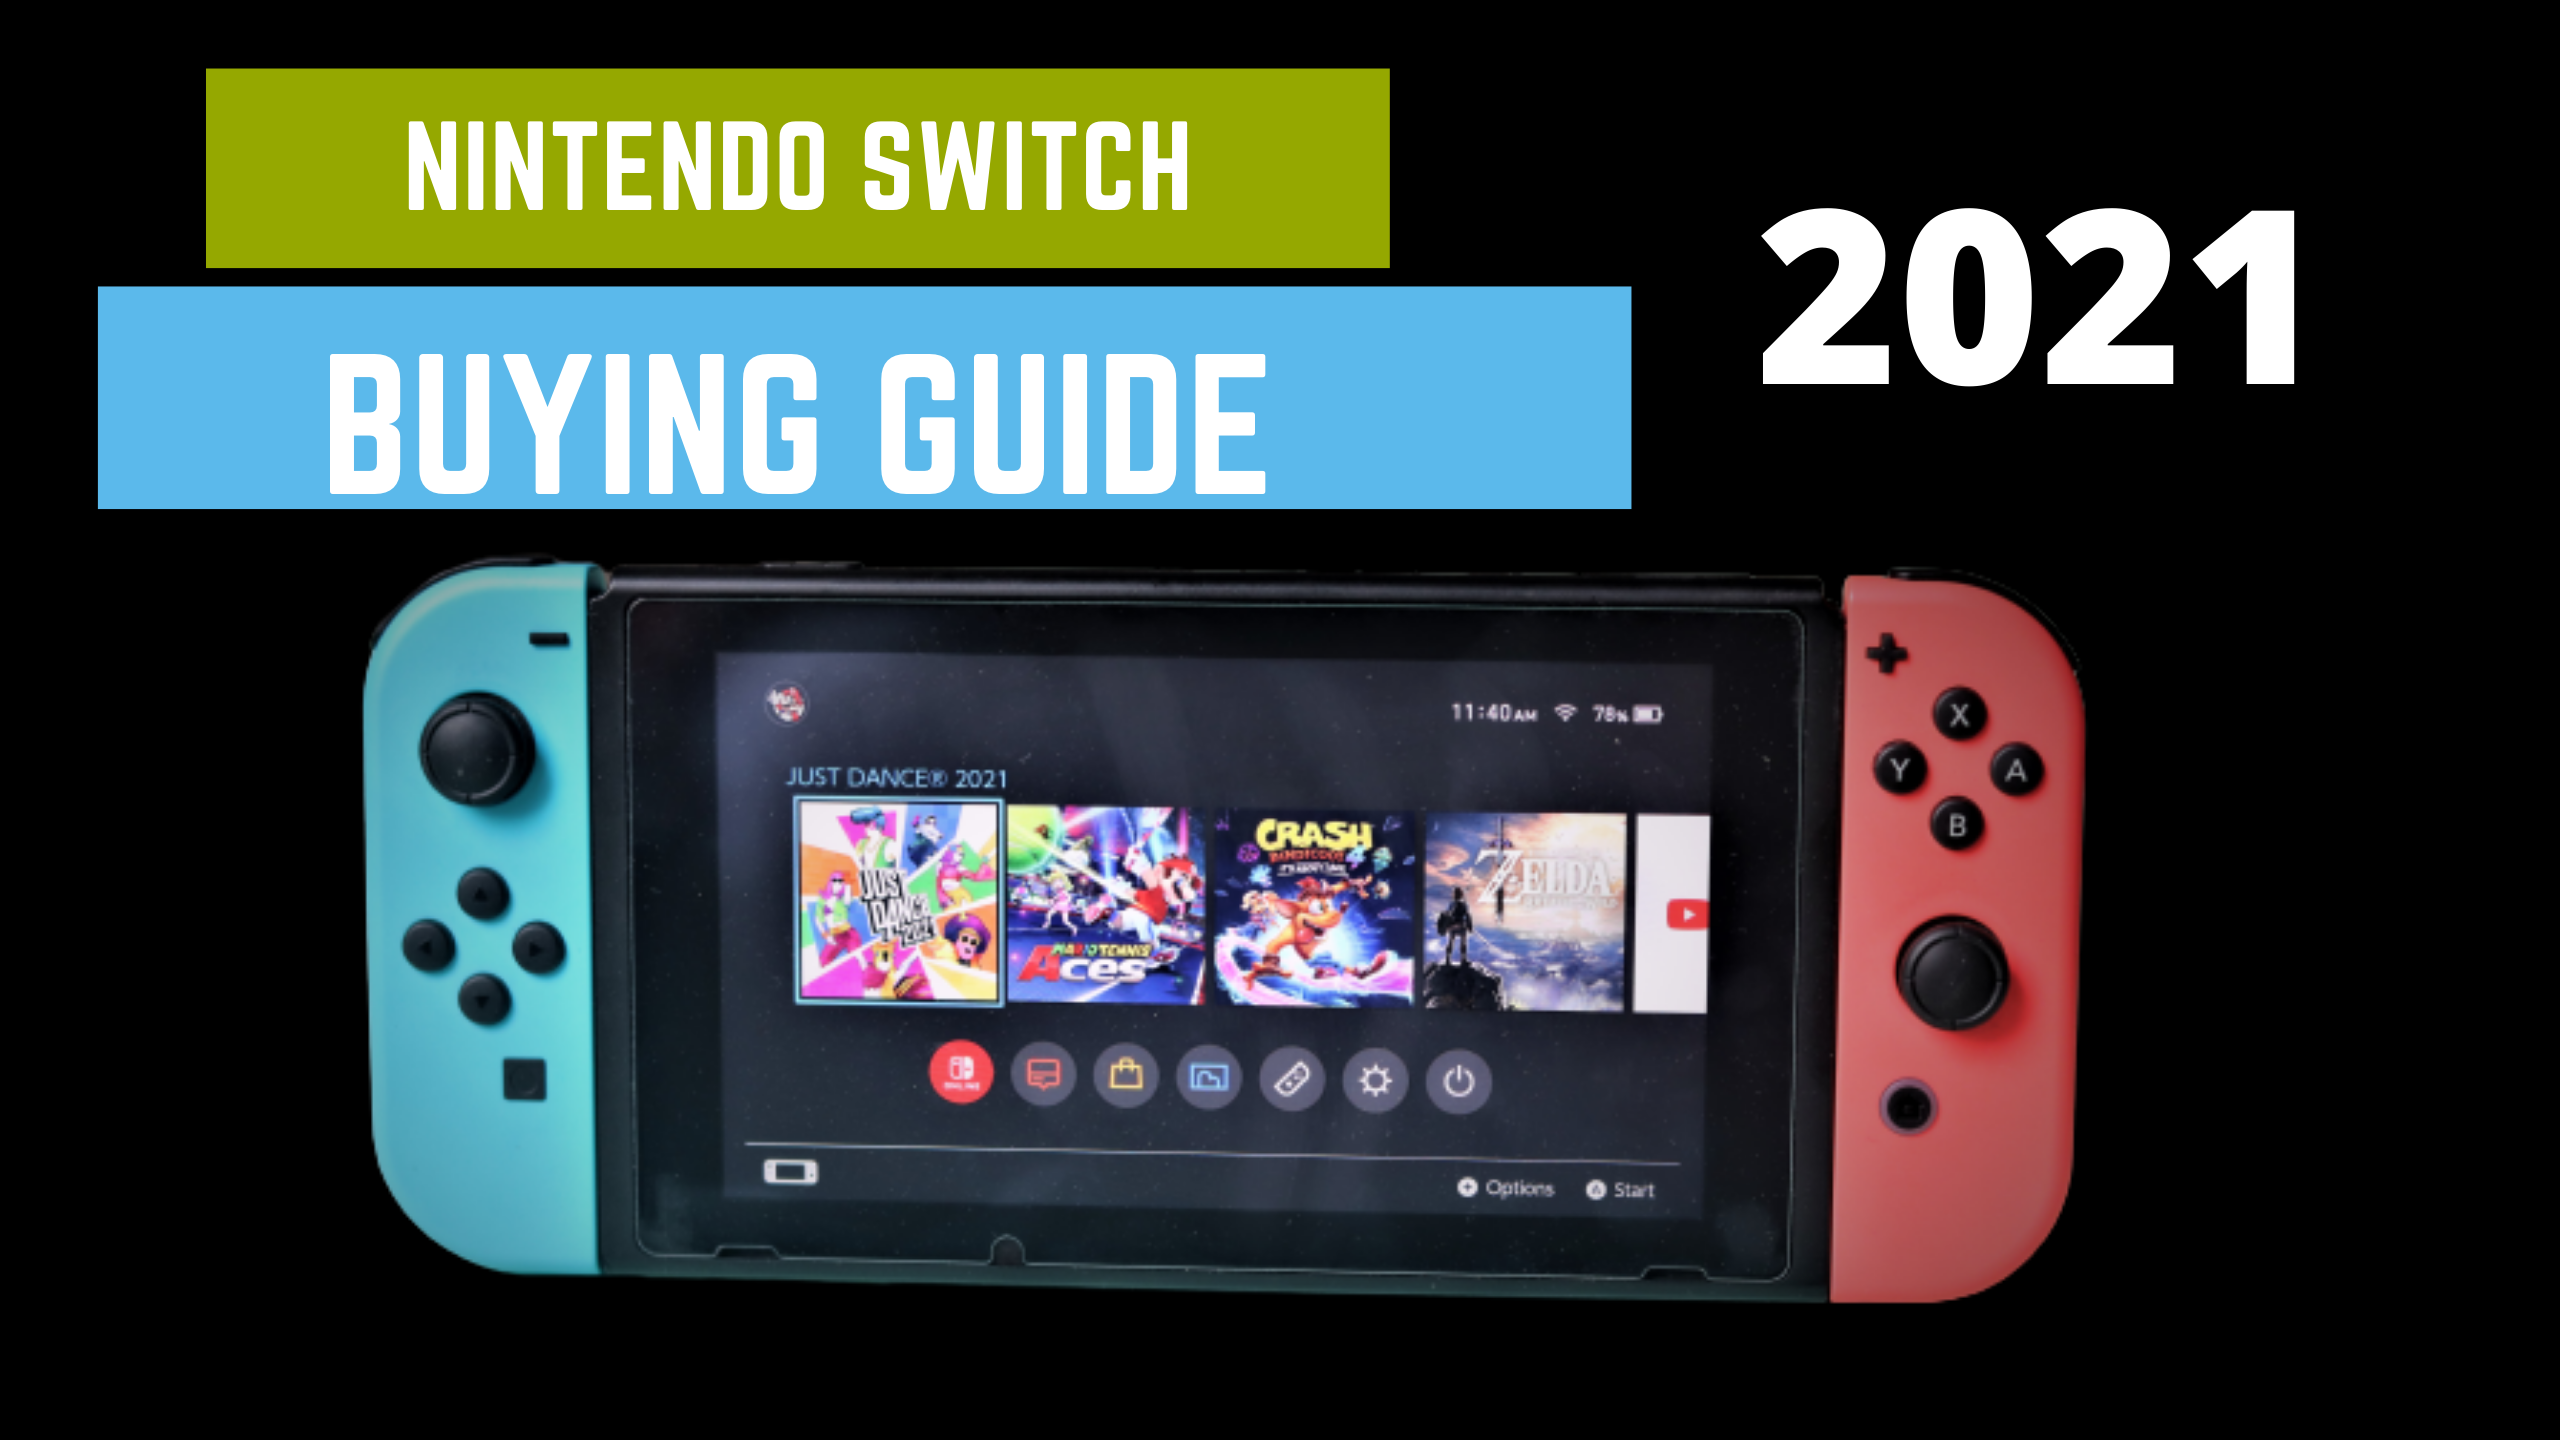 Nintendo Switch really worth buying in 2021 GameHaat